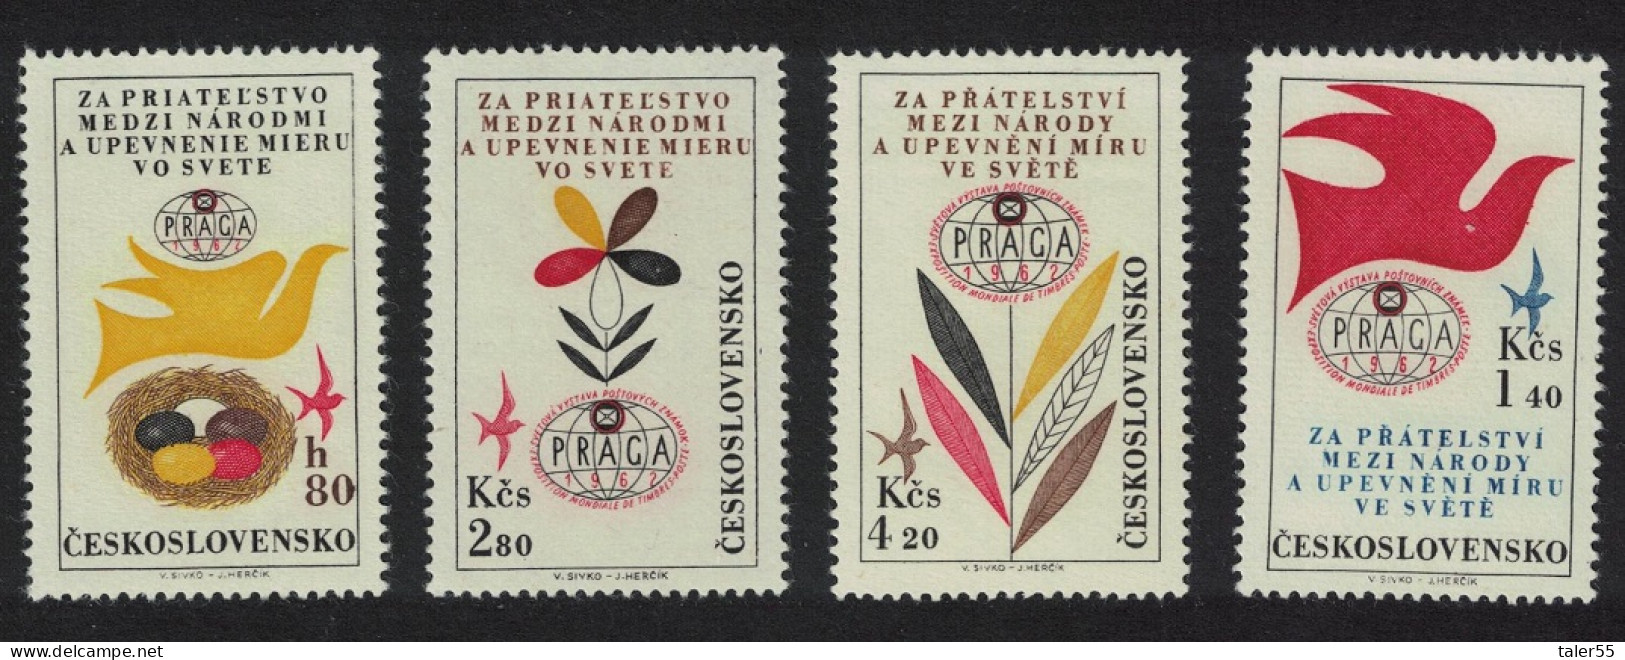 Czechoslovakia PRAGA 1962 Stamp Exhibition 4th Issue 4v 1962 MNH SG#1297-1300 - Unused Stamps